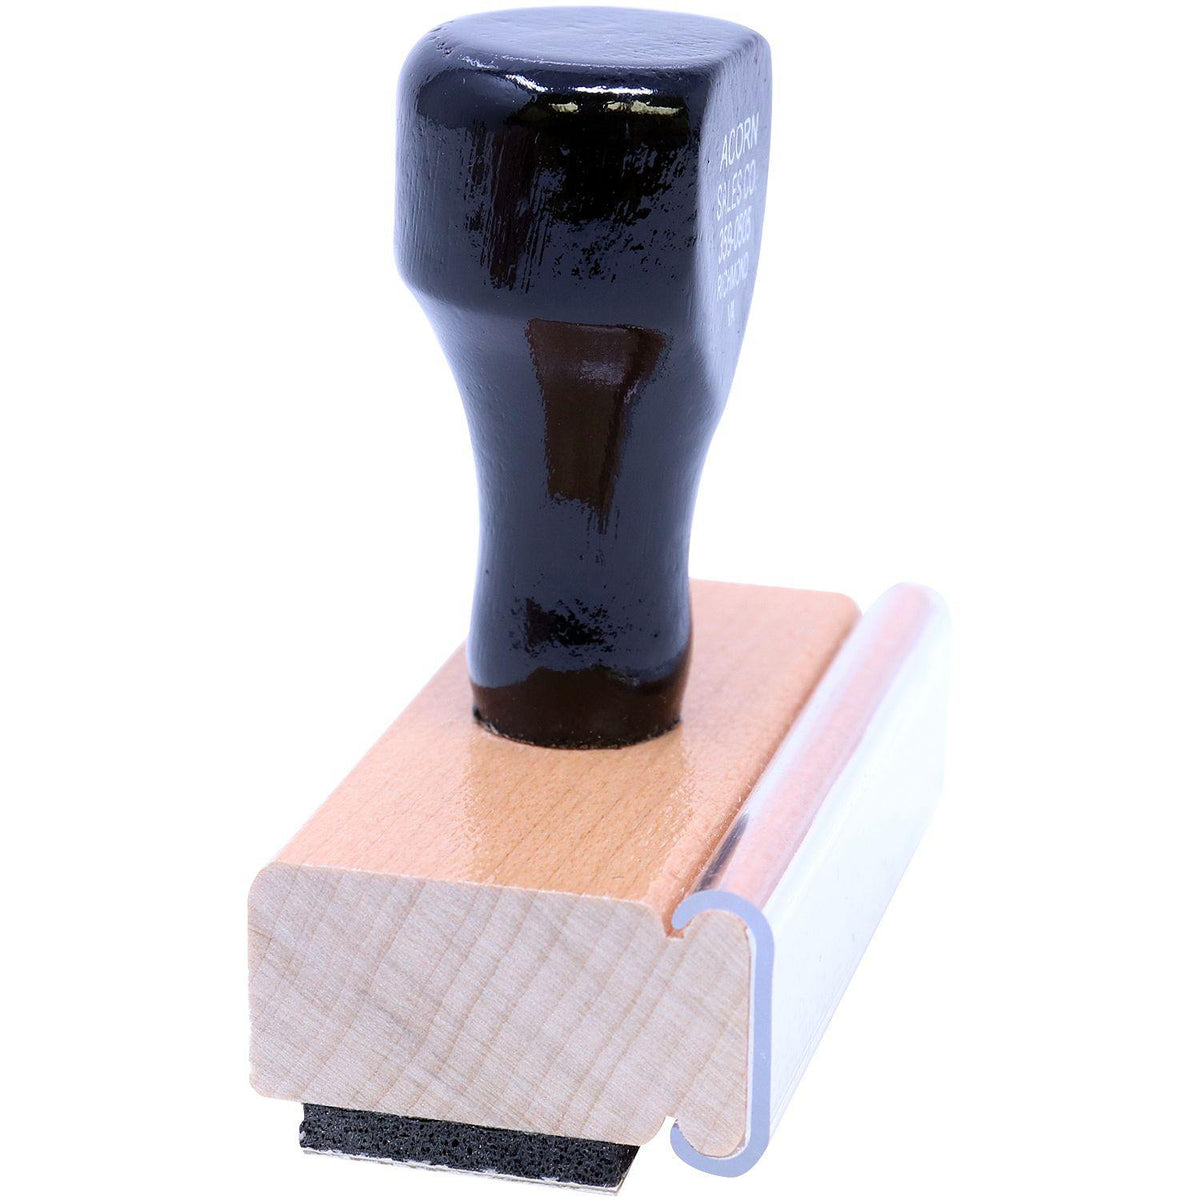 Side View of Large Secret Rubber Stamp at an Angle